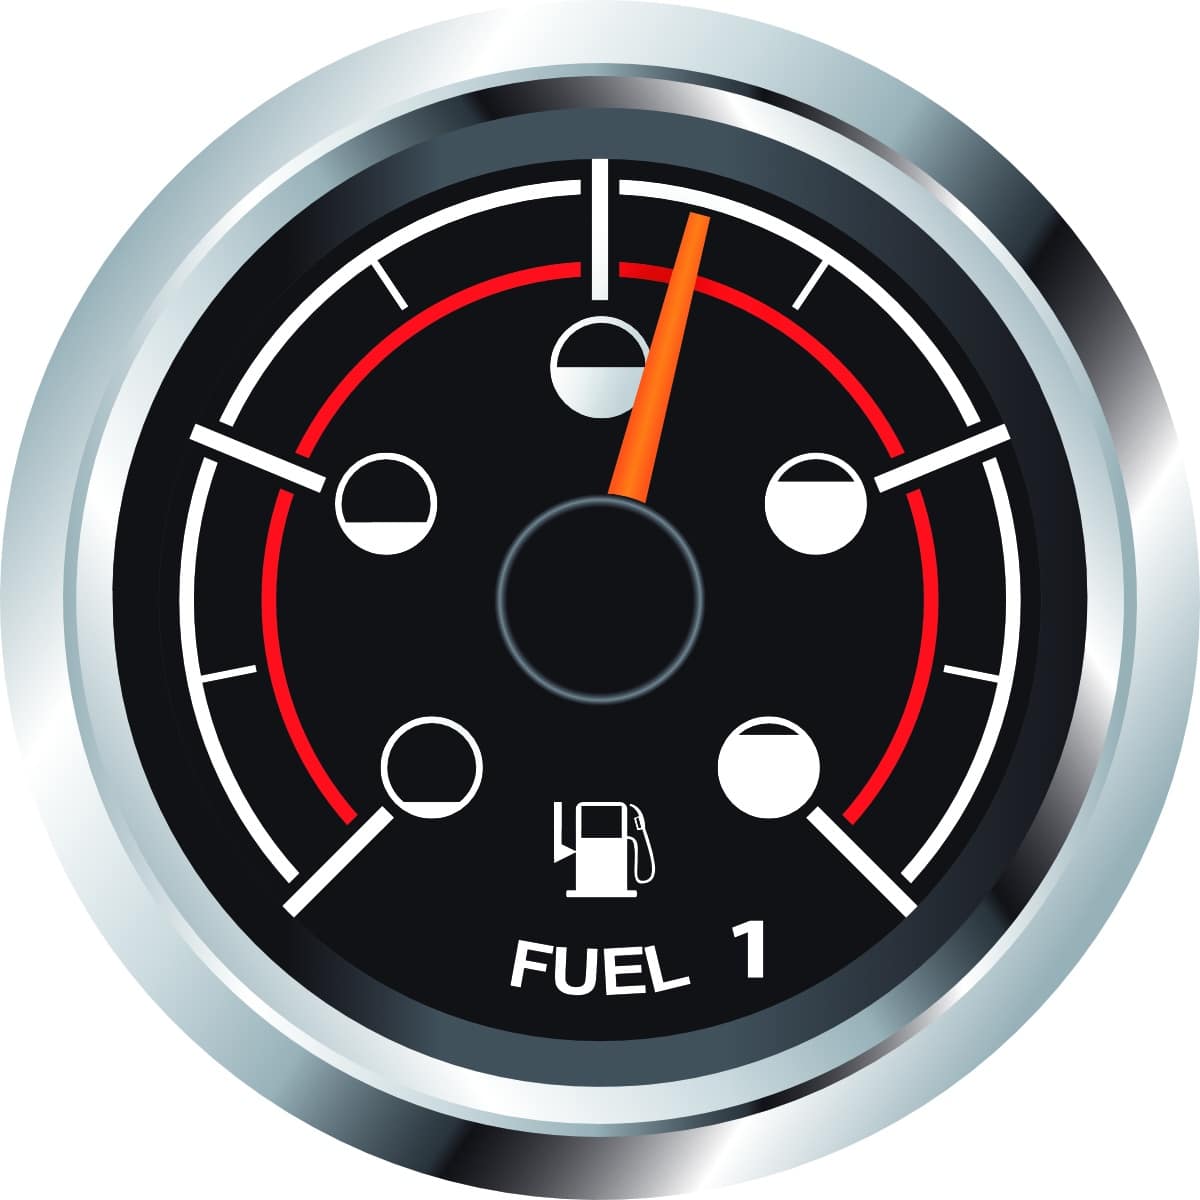 Image of the Fuel meter